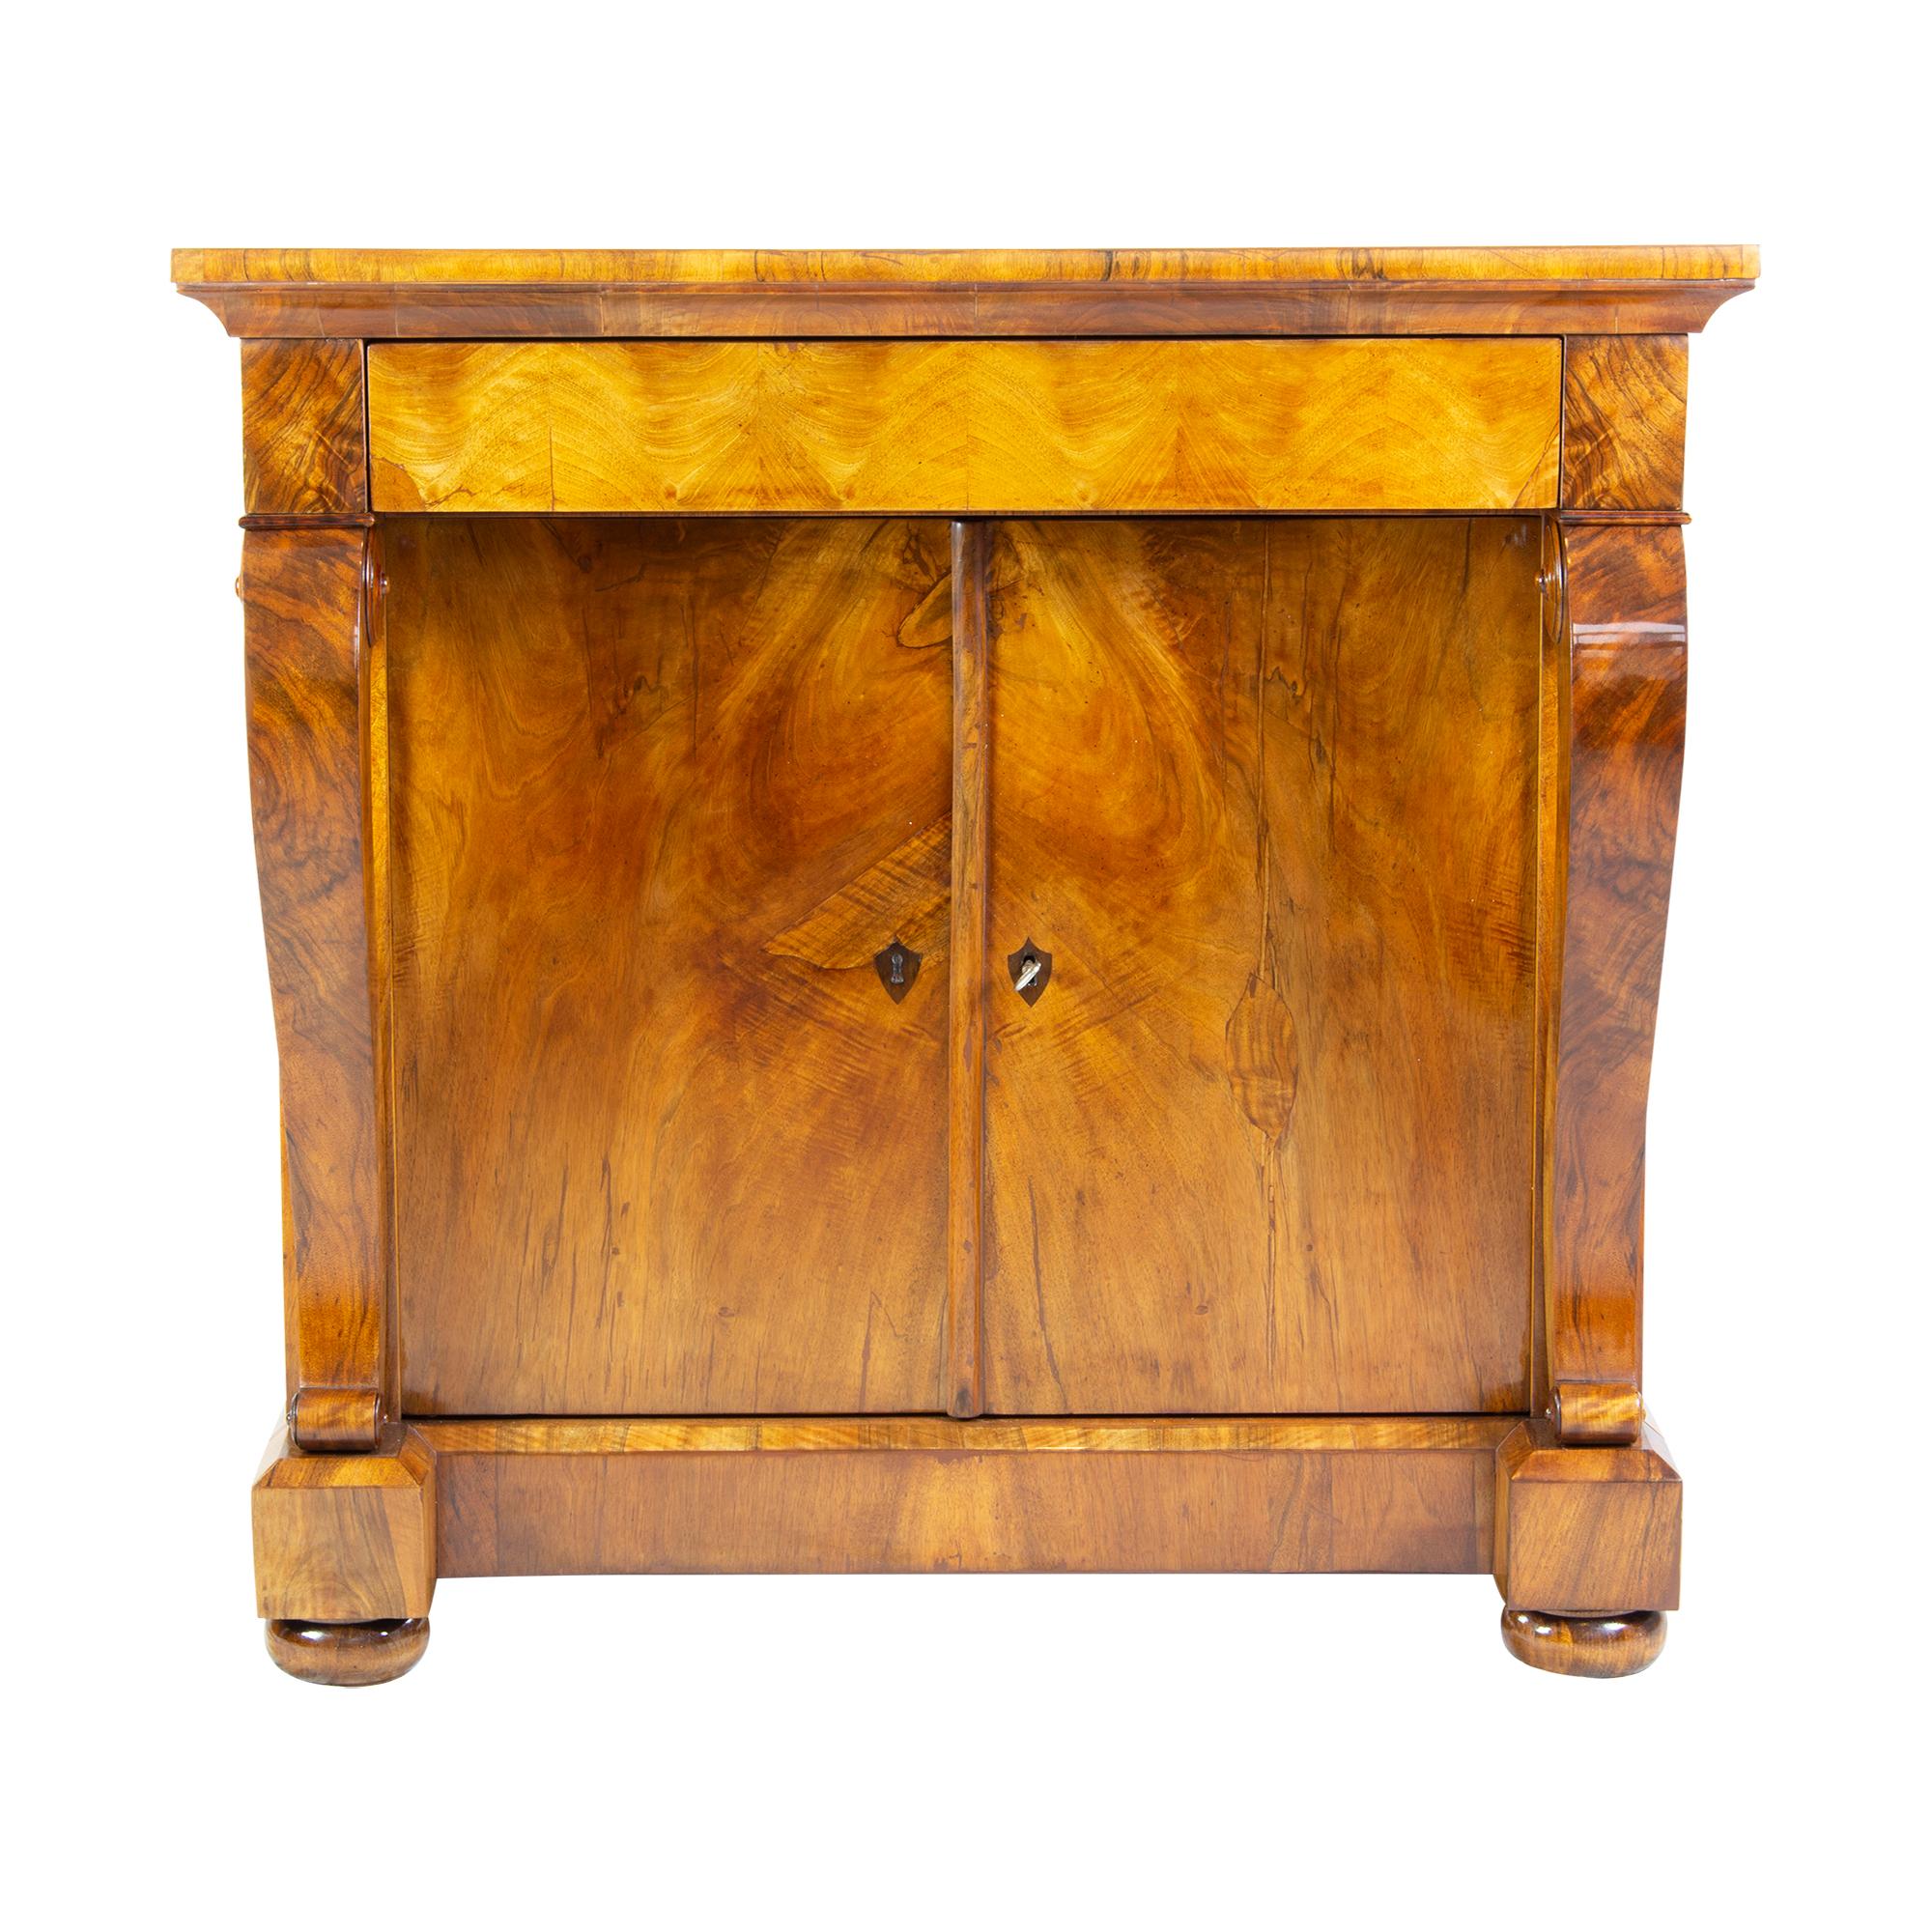 The furniture is a console half cabinet from the Biedermeier period. The half cabinet is walnut veneered on a spruce corpus. There is a drawer under the top and under it are the two doors, which are lockable together. The corpus stands on ball feet